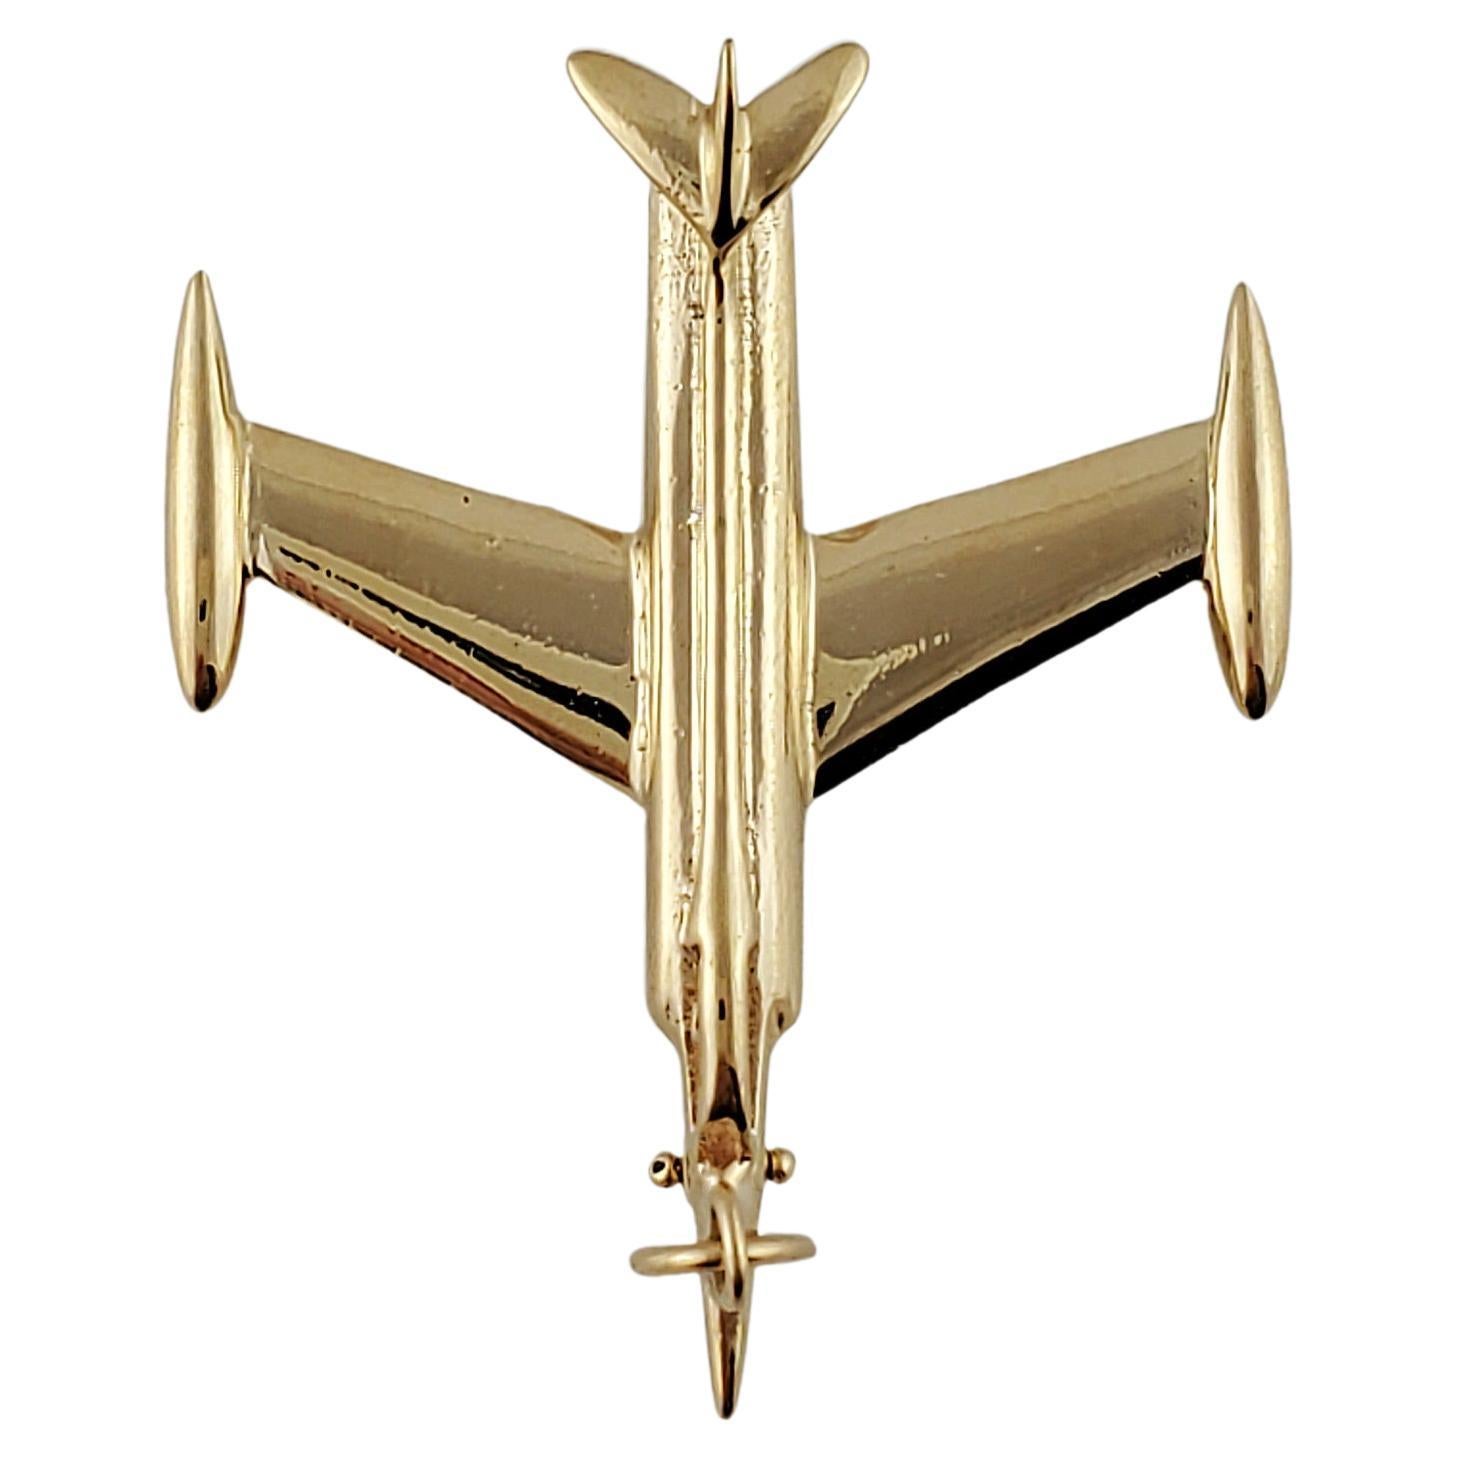 Vintage 14K Yellow Gold Plane Charm

Beautiful 3D plane charm has detail of a life-like plane and is crafted in 14k yellow gold.

Size: 32 mm X 27.1 mm

Weight: 4.9 gr / 3.1 dwt

Hallmark: A.G.14K

Very good condition, professionally polished.

Will